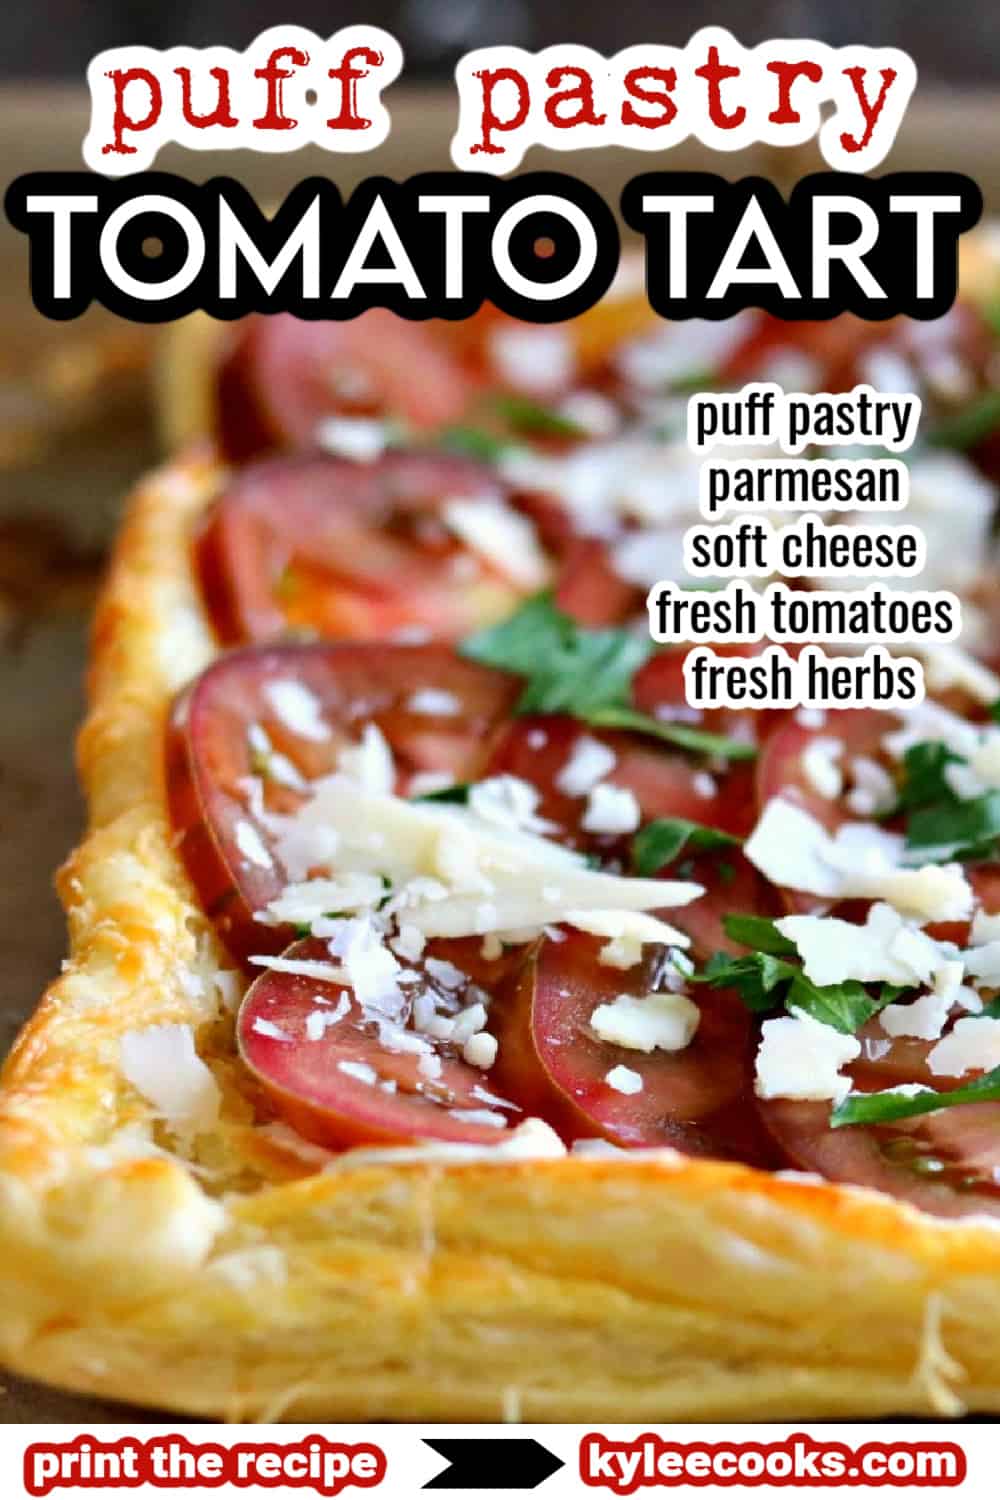 puff pastry tomato tart with recipe title overlaid in text.